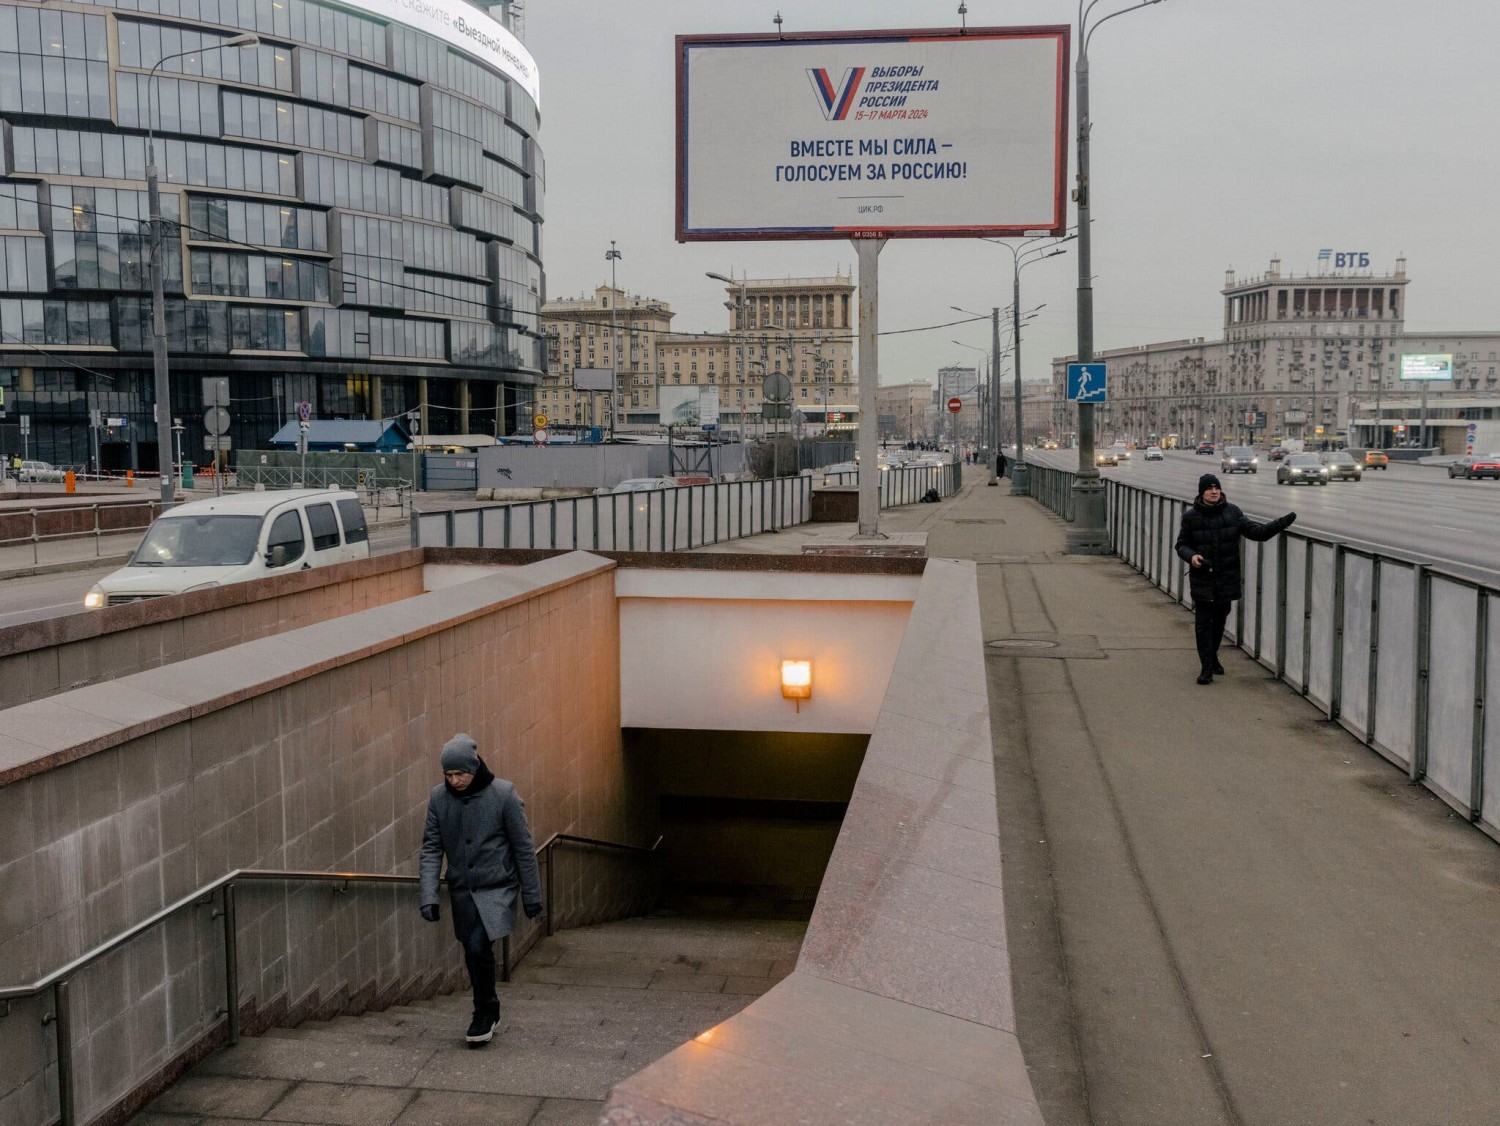 A presidential election poster in Moscow on Sunday. Credit...Nanna Heitmann for The New York Times